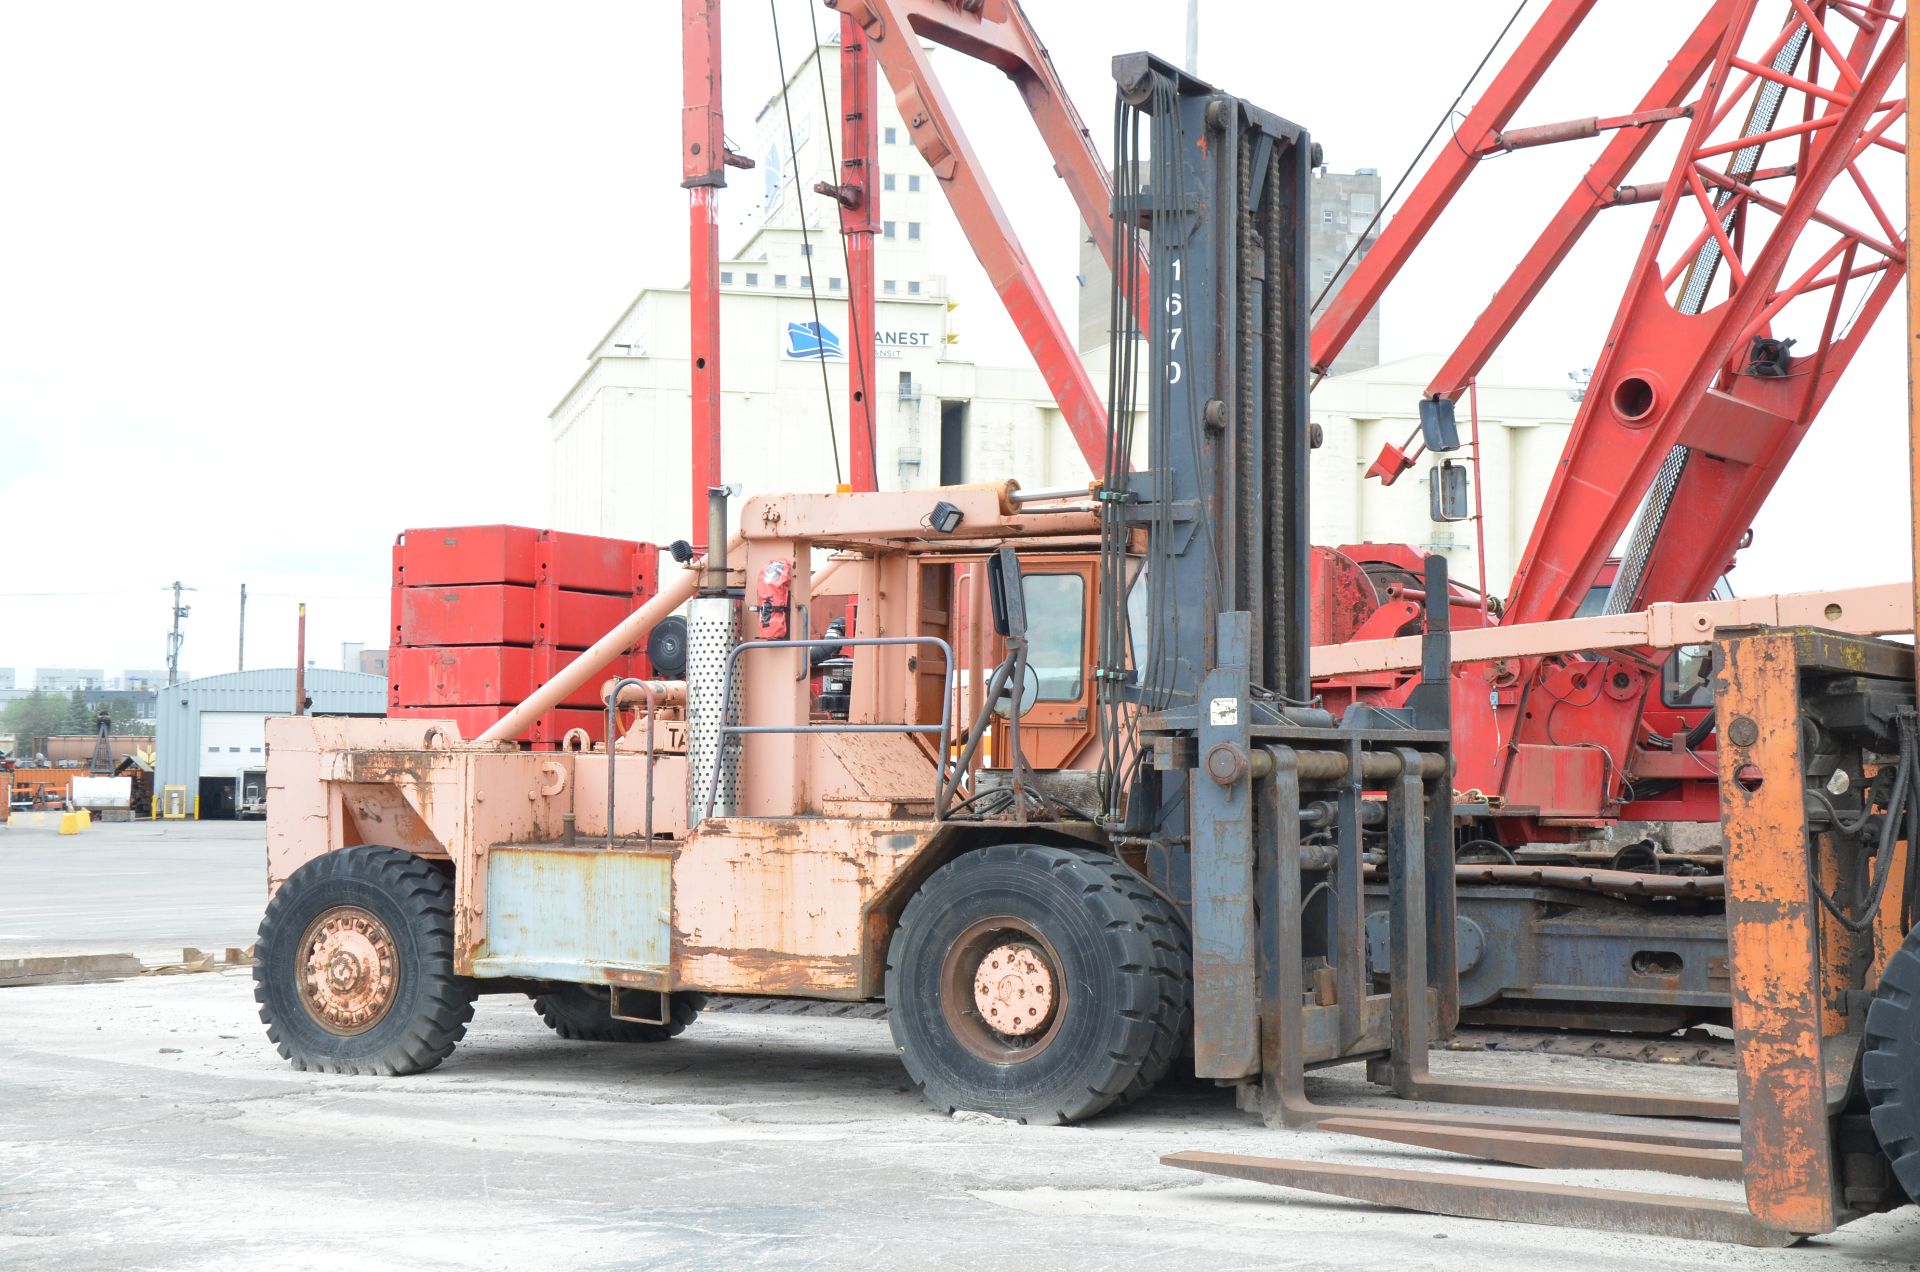 TAYLOR Y62 WOM HEAVY DUTY OUTDOOR DIESEL FORKLIFT WITH 62,000 LBS. CAPACITY - Image 21 of 21